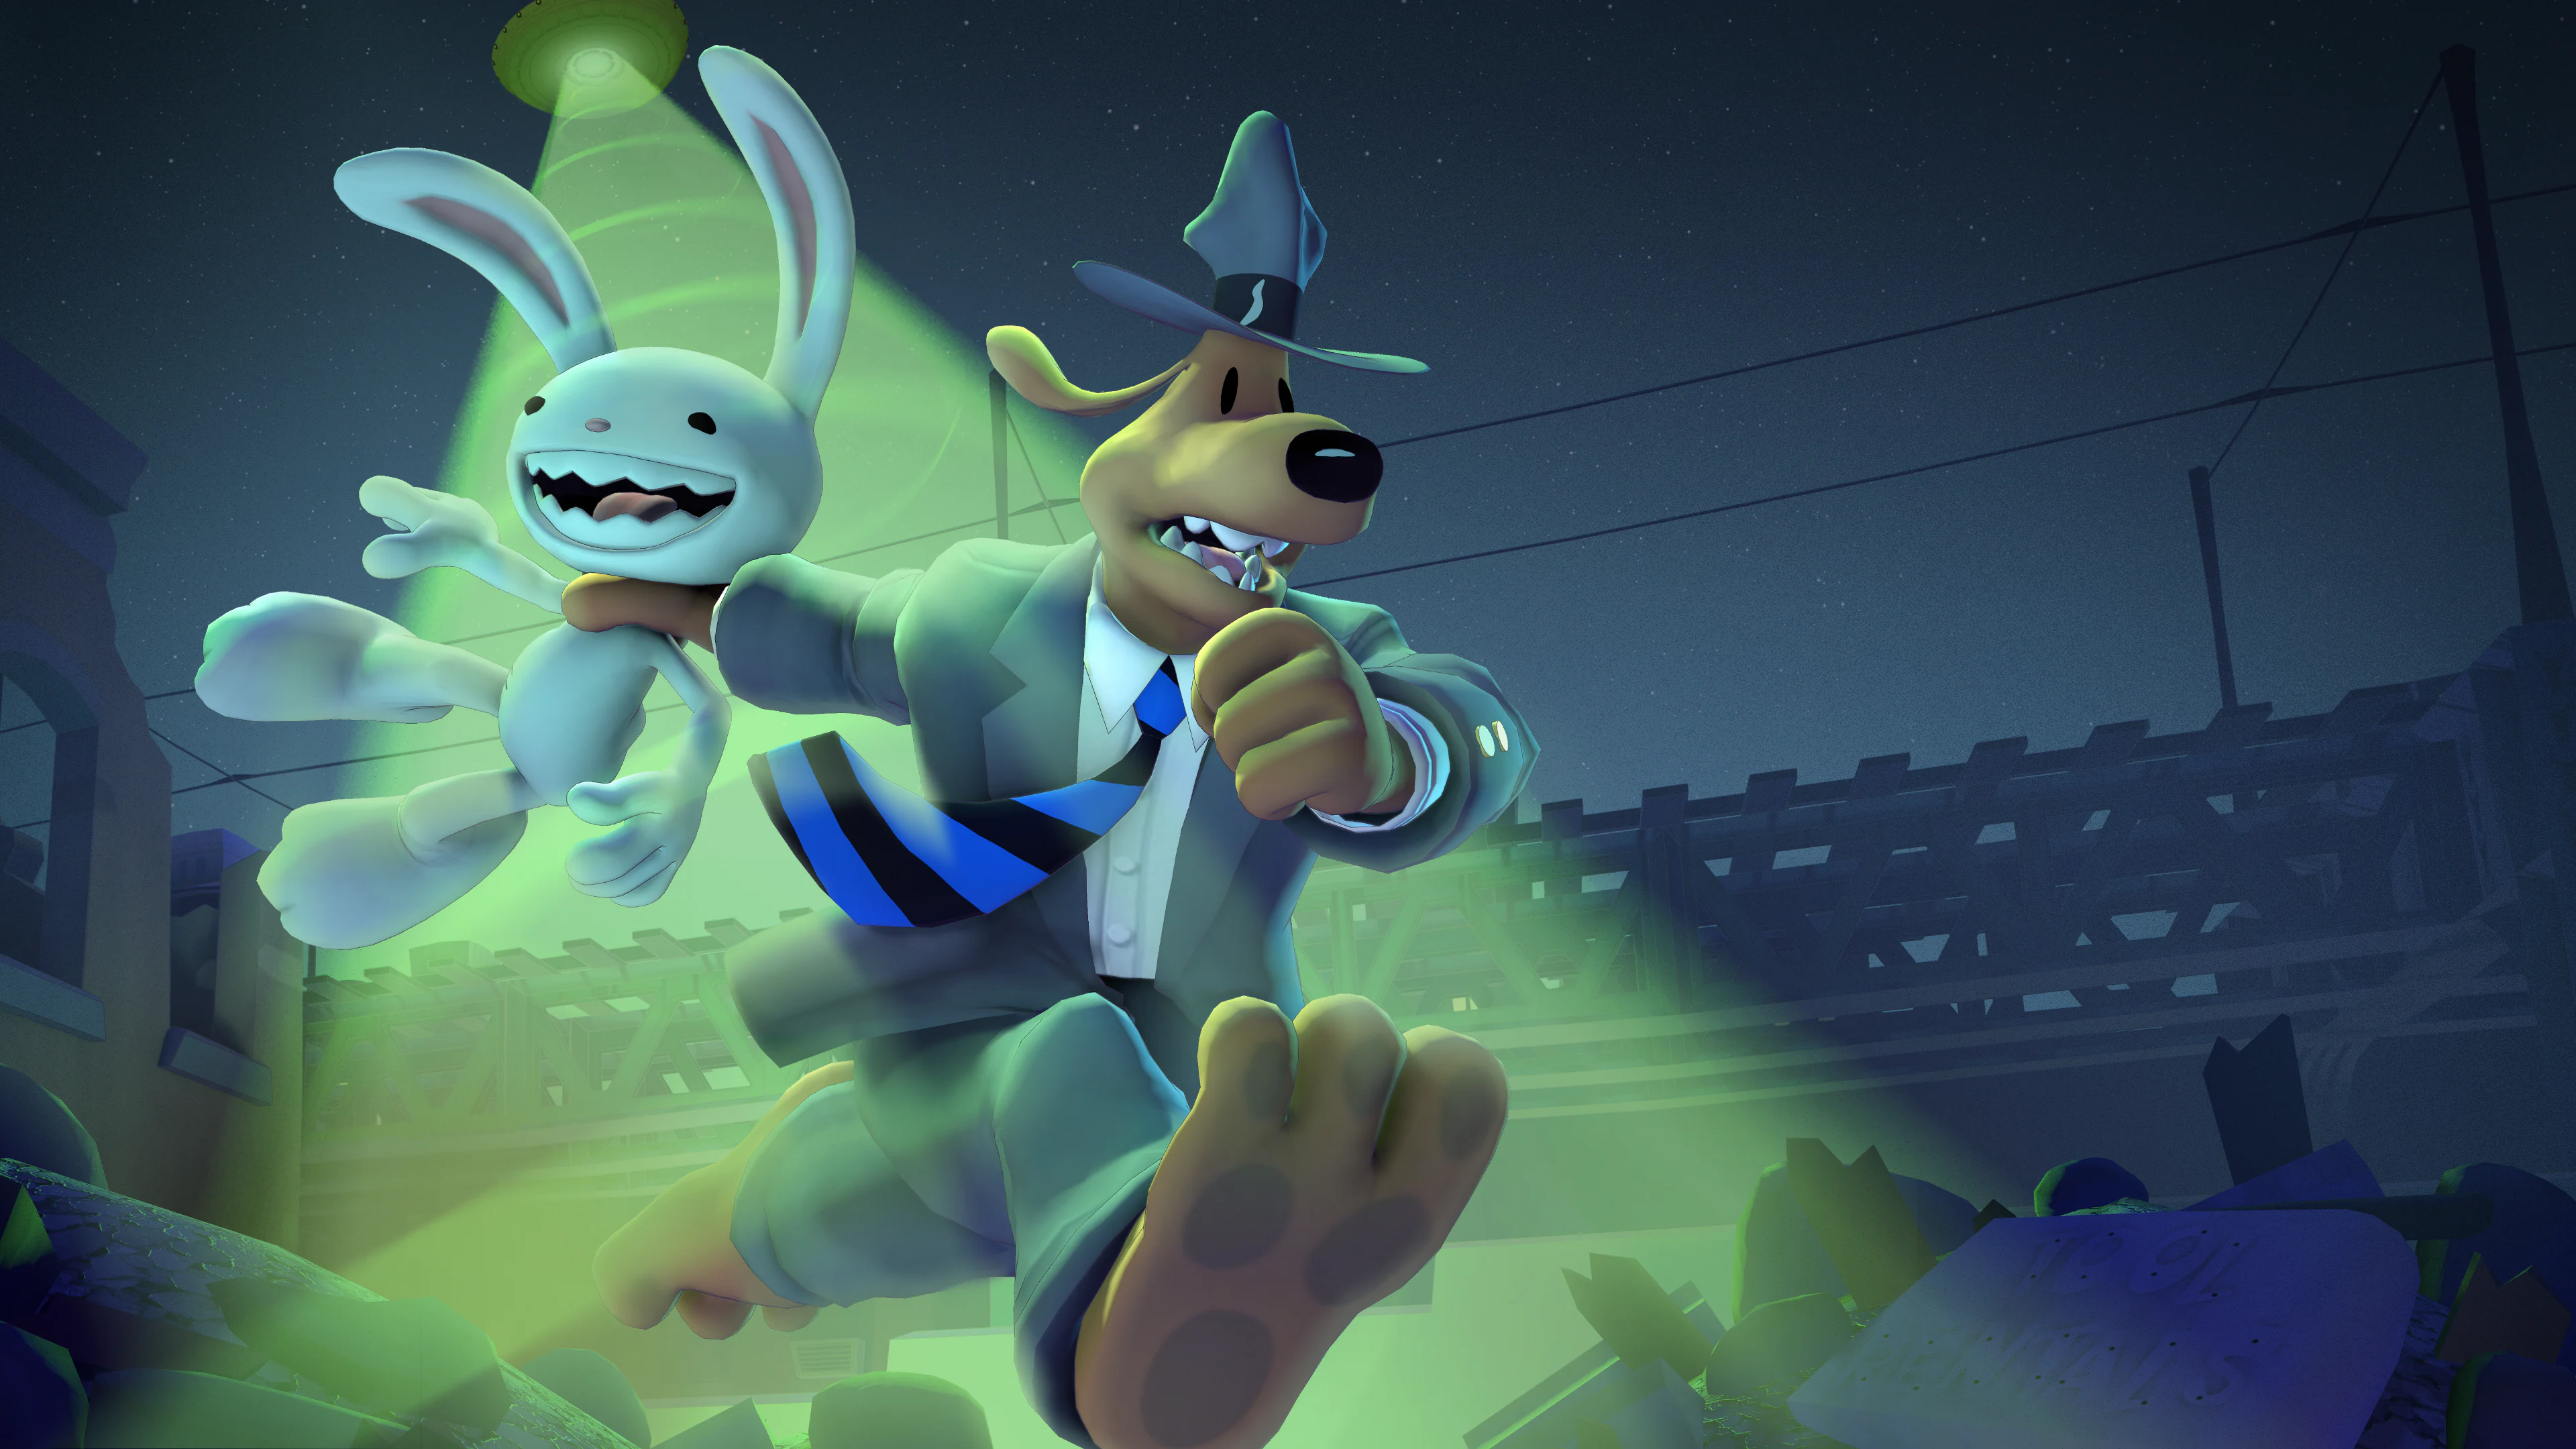 Sam&Max Beyond Time and Space Remastered